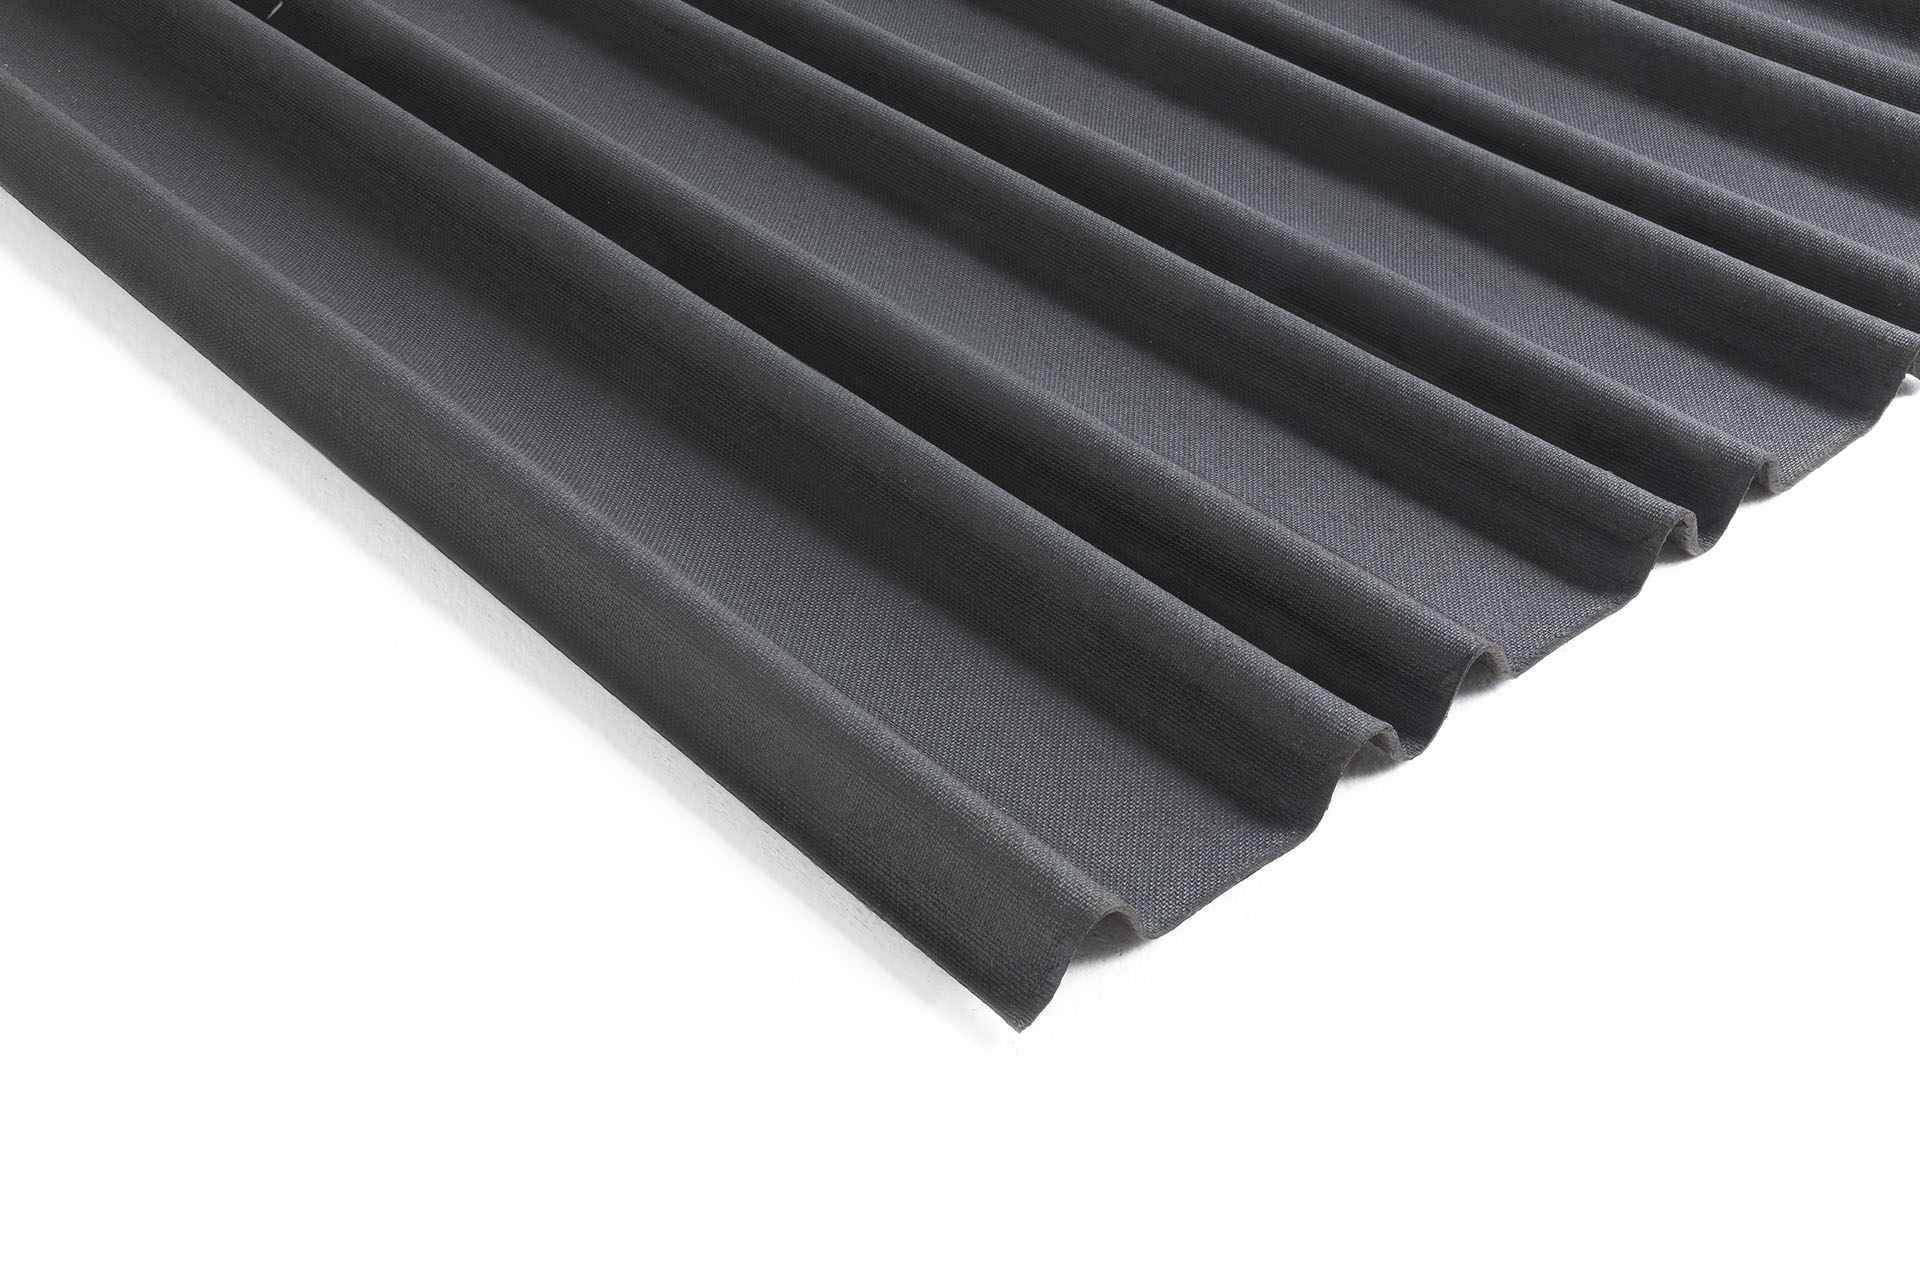 Wave profiled bituminous sheet for use under clay tiles